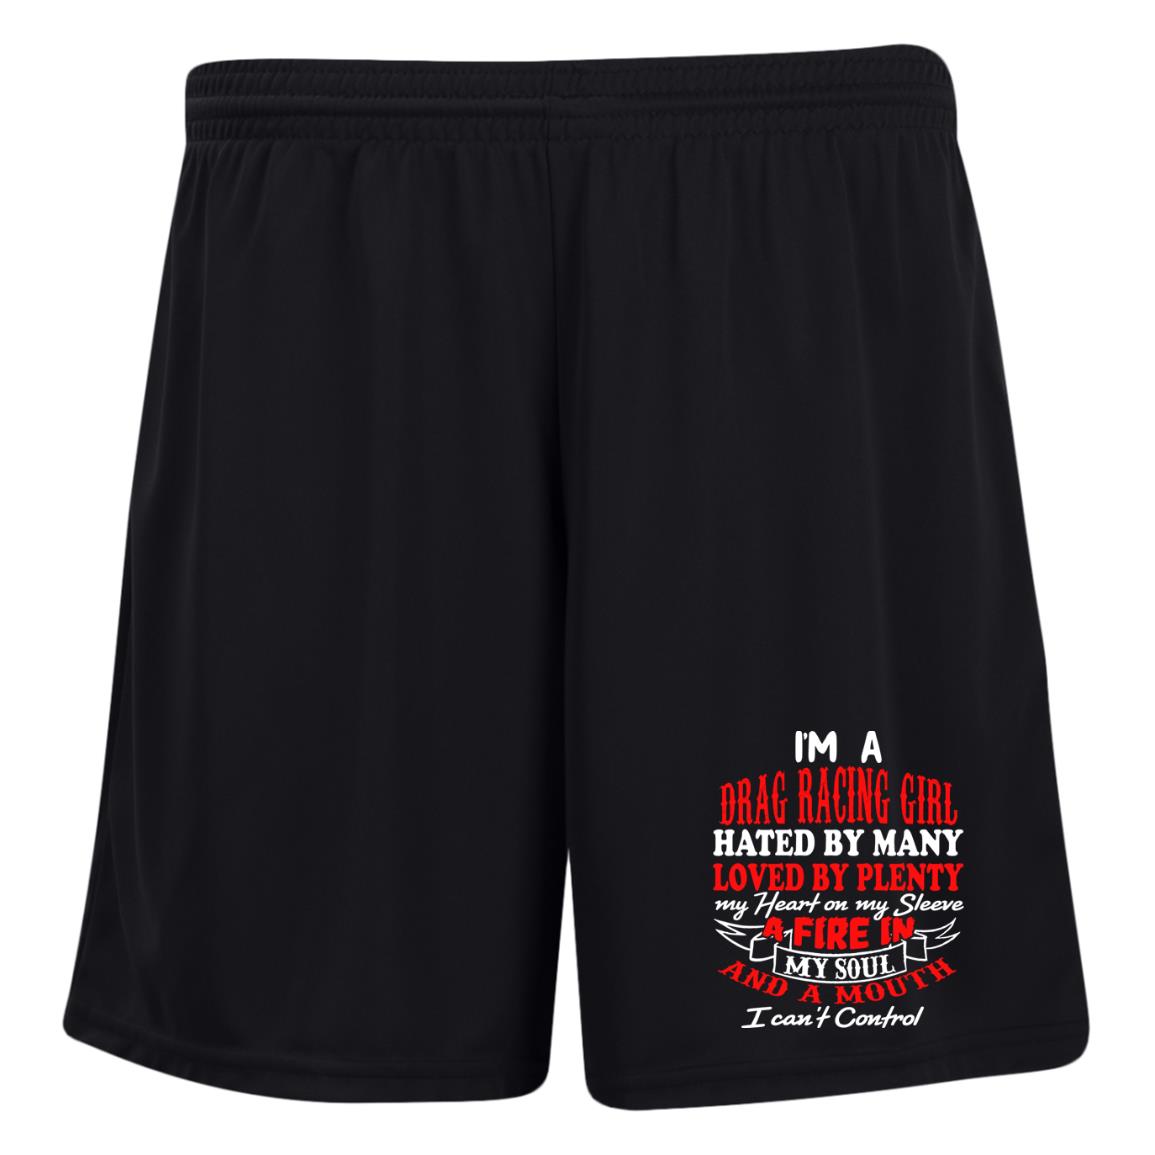 I'm A Drag Racing Girl Hated By Many Loved By Plenty Ladies' Moisture-Wicking 7 inch Inseam Training Shorts